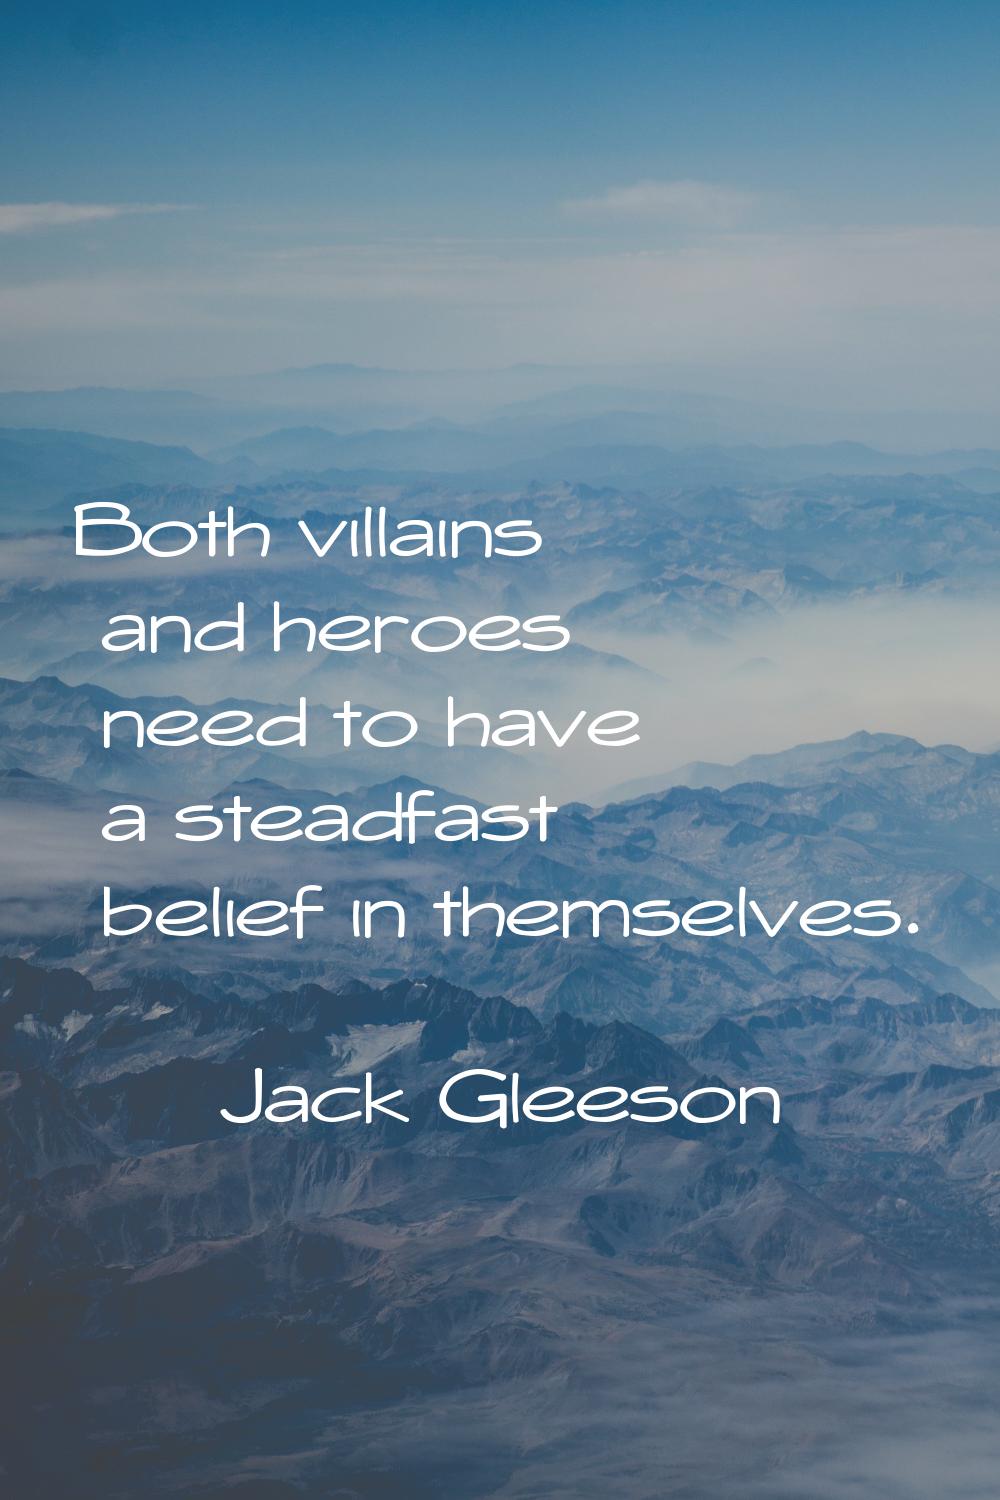 Both villains and heroes need to have a steadfast belief in themselves.